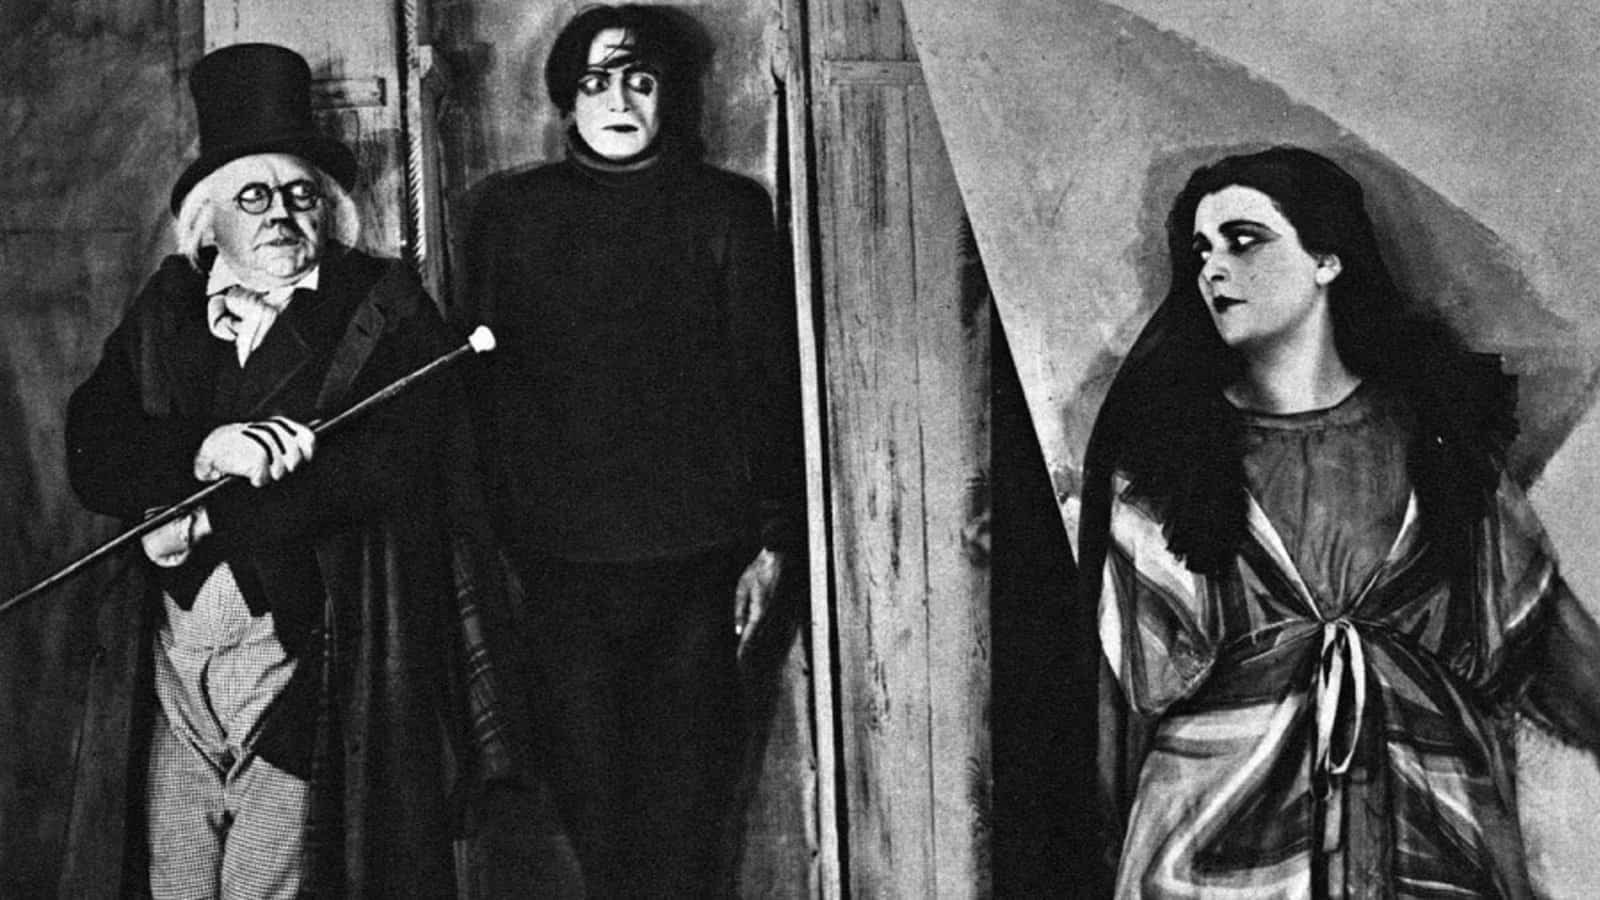 The Cabinet of Dr. Caligari with Live Score by The Invincible Czars